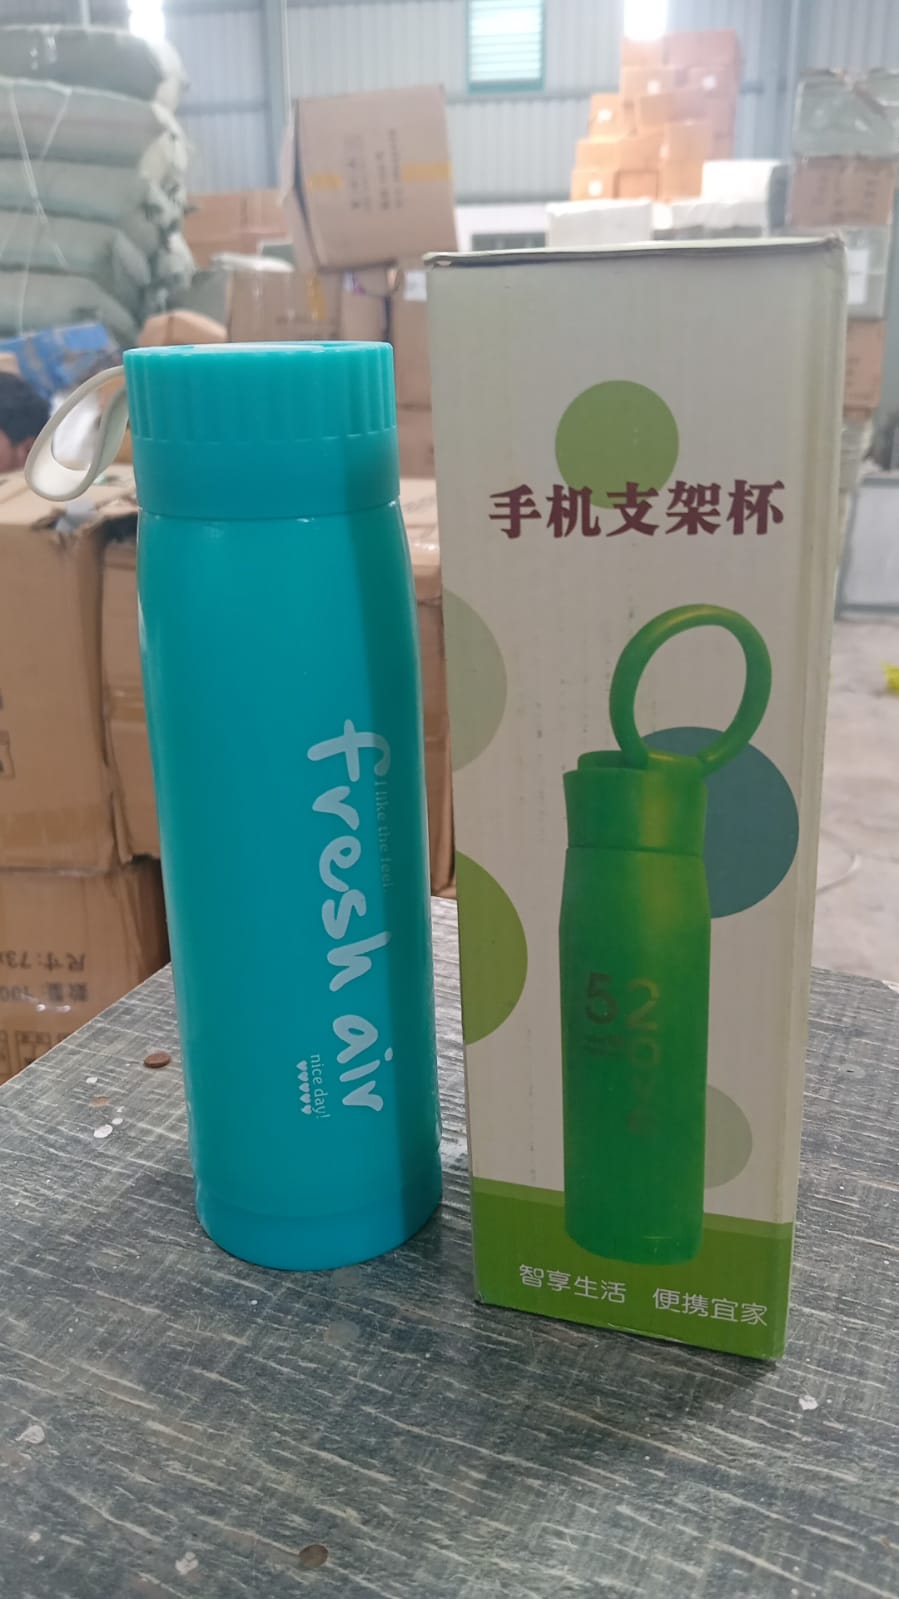 Portable Water Bottle, Creative Wheat Fragrance Glass Bottle With Mobile Phone Holder Wide Mouth Glass Water 380Ml